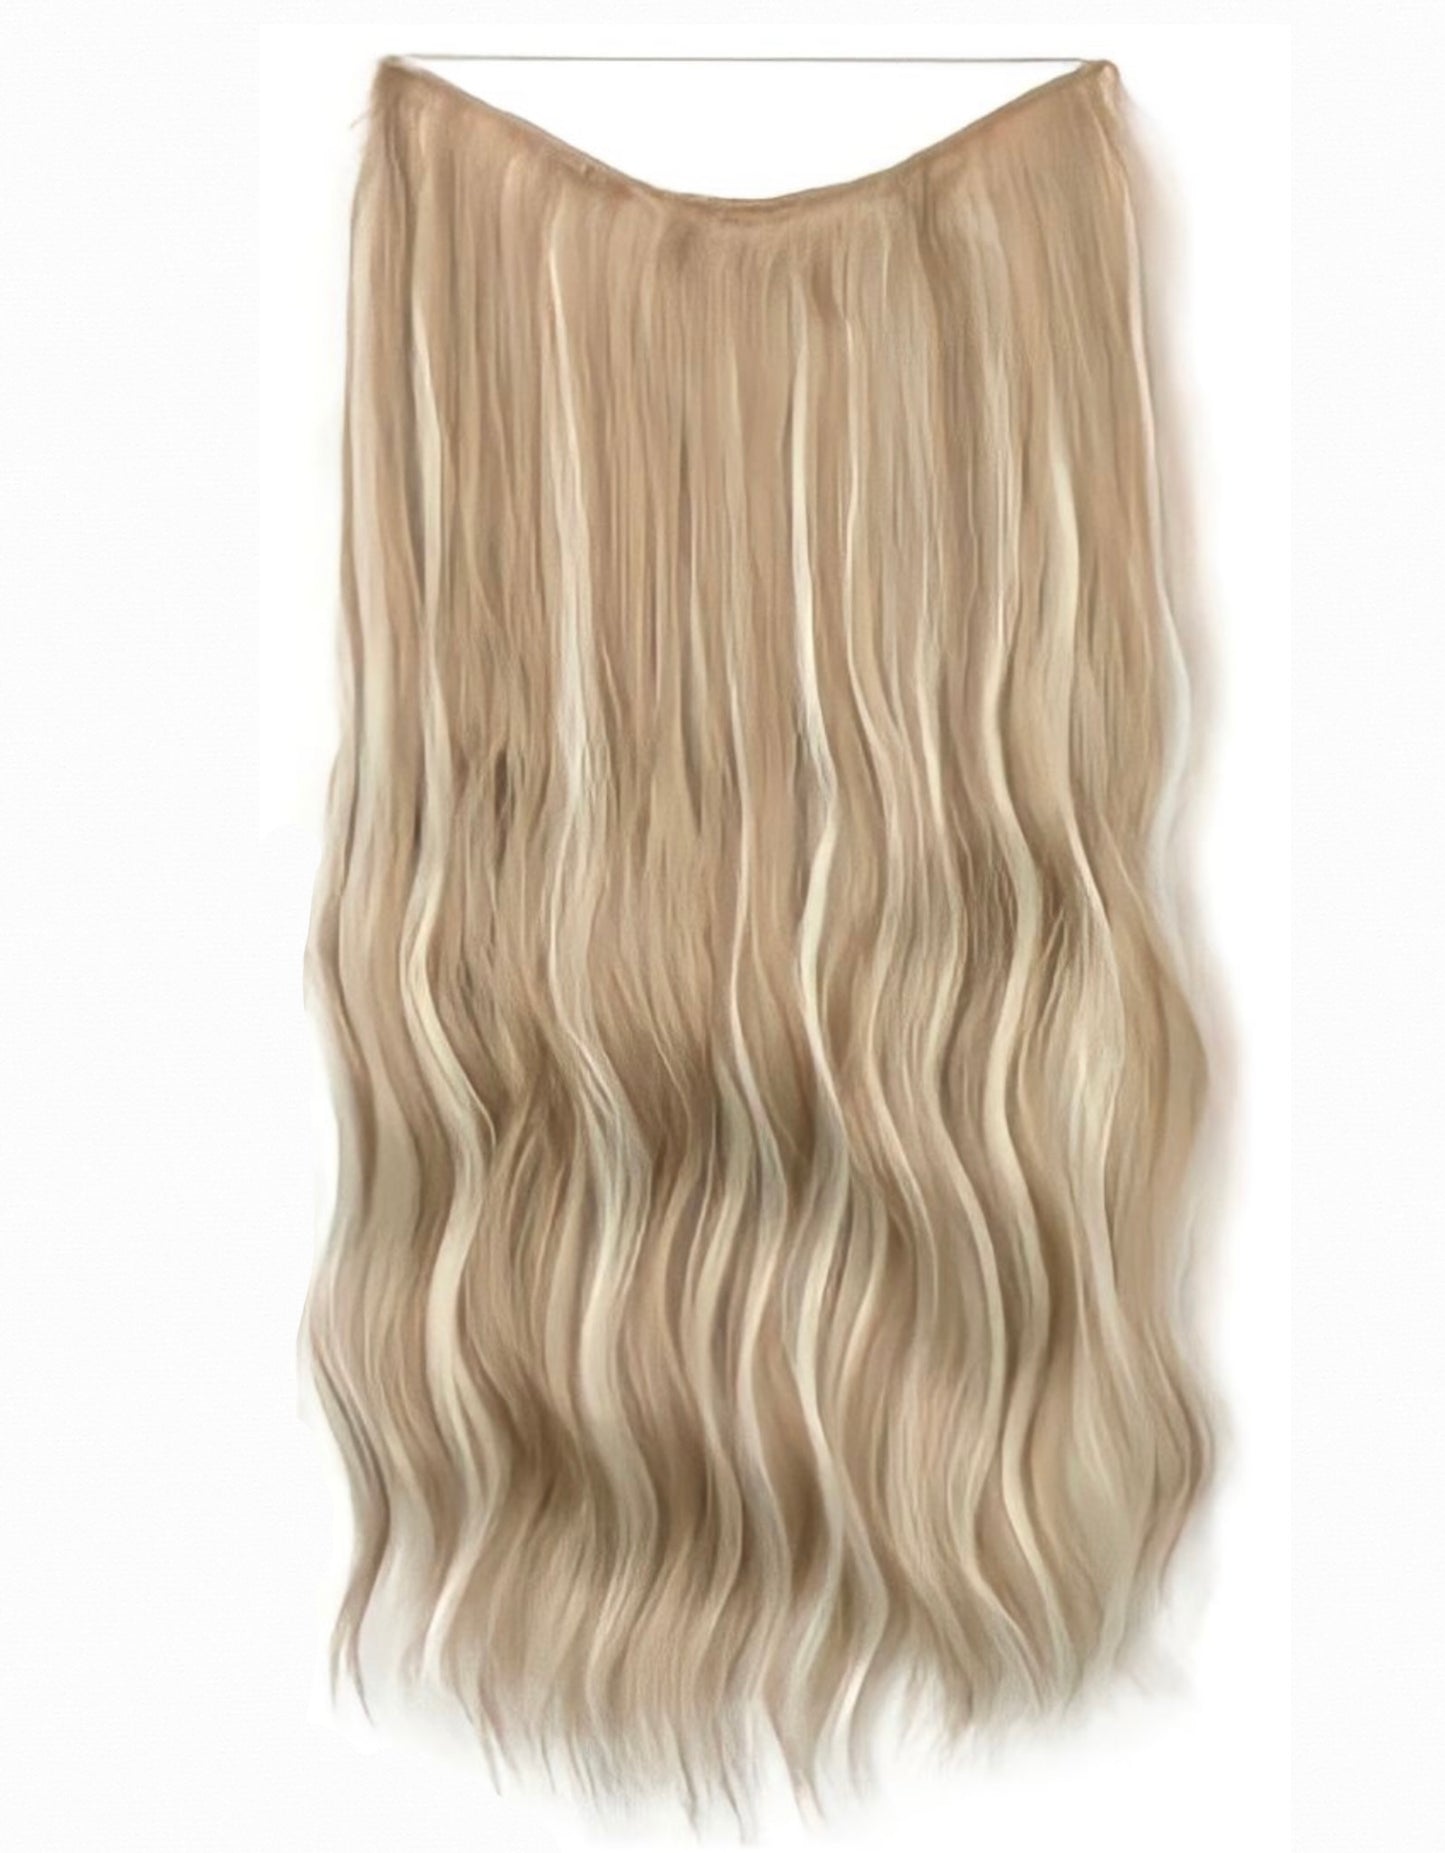 Halo Hair Extension Synthetic Hair